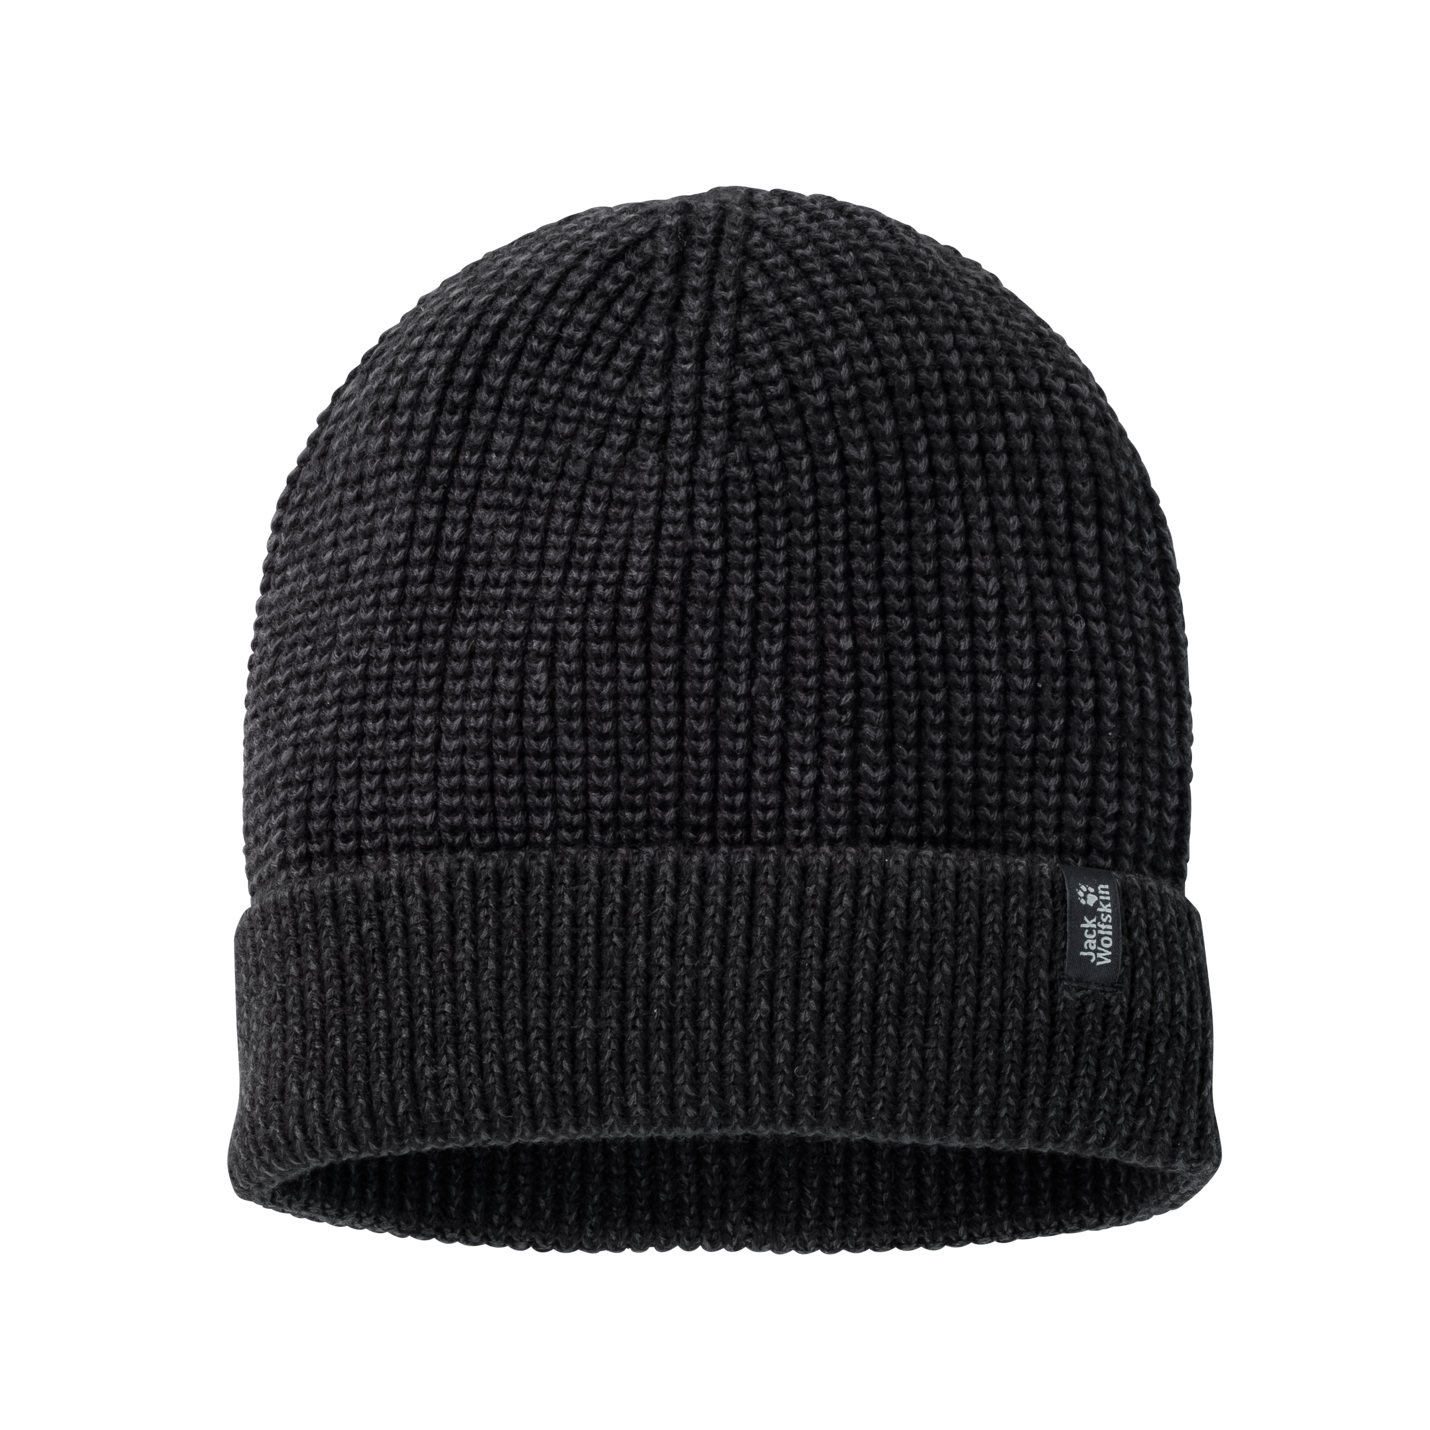 Men's Every Day Outdoors Beanie